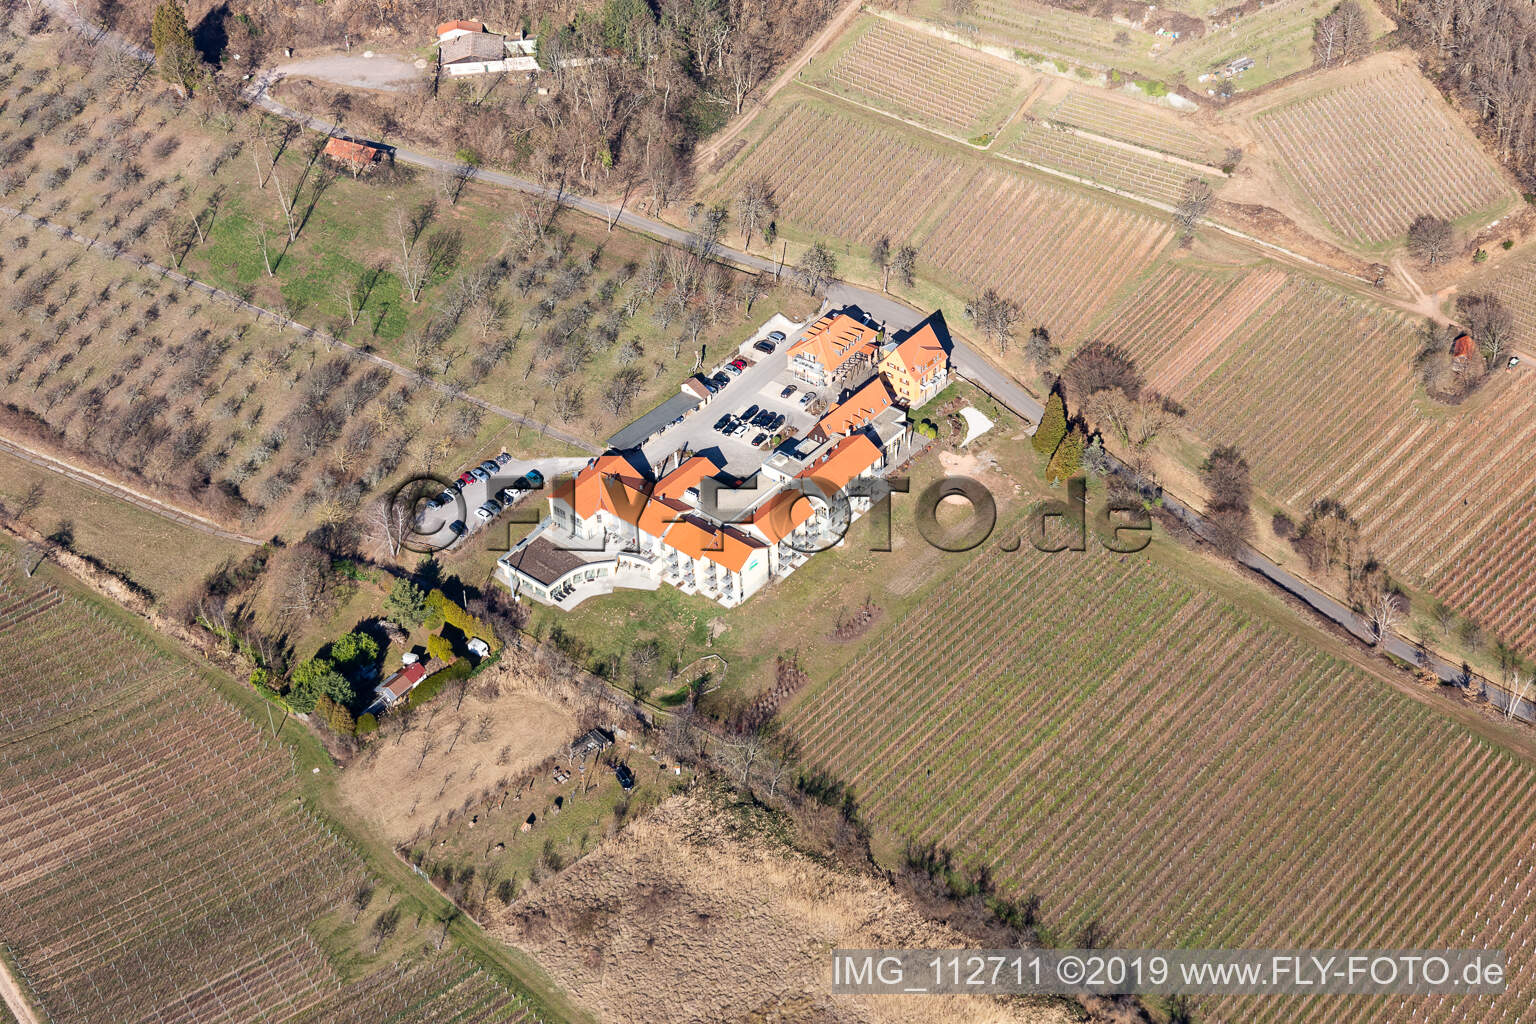 Oblique view of Complex of the hotel building Wohlfuehlhotel Alte Rebschule and Gasthaus Sesel in Rhodt unter Rietburg in the state Rhineland-Palatinate, Germany